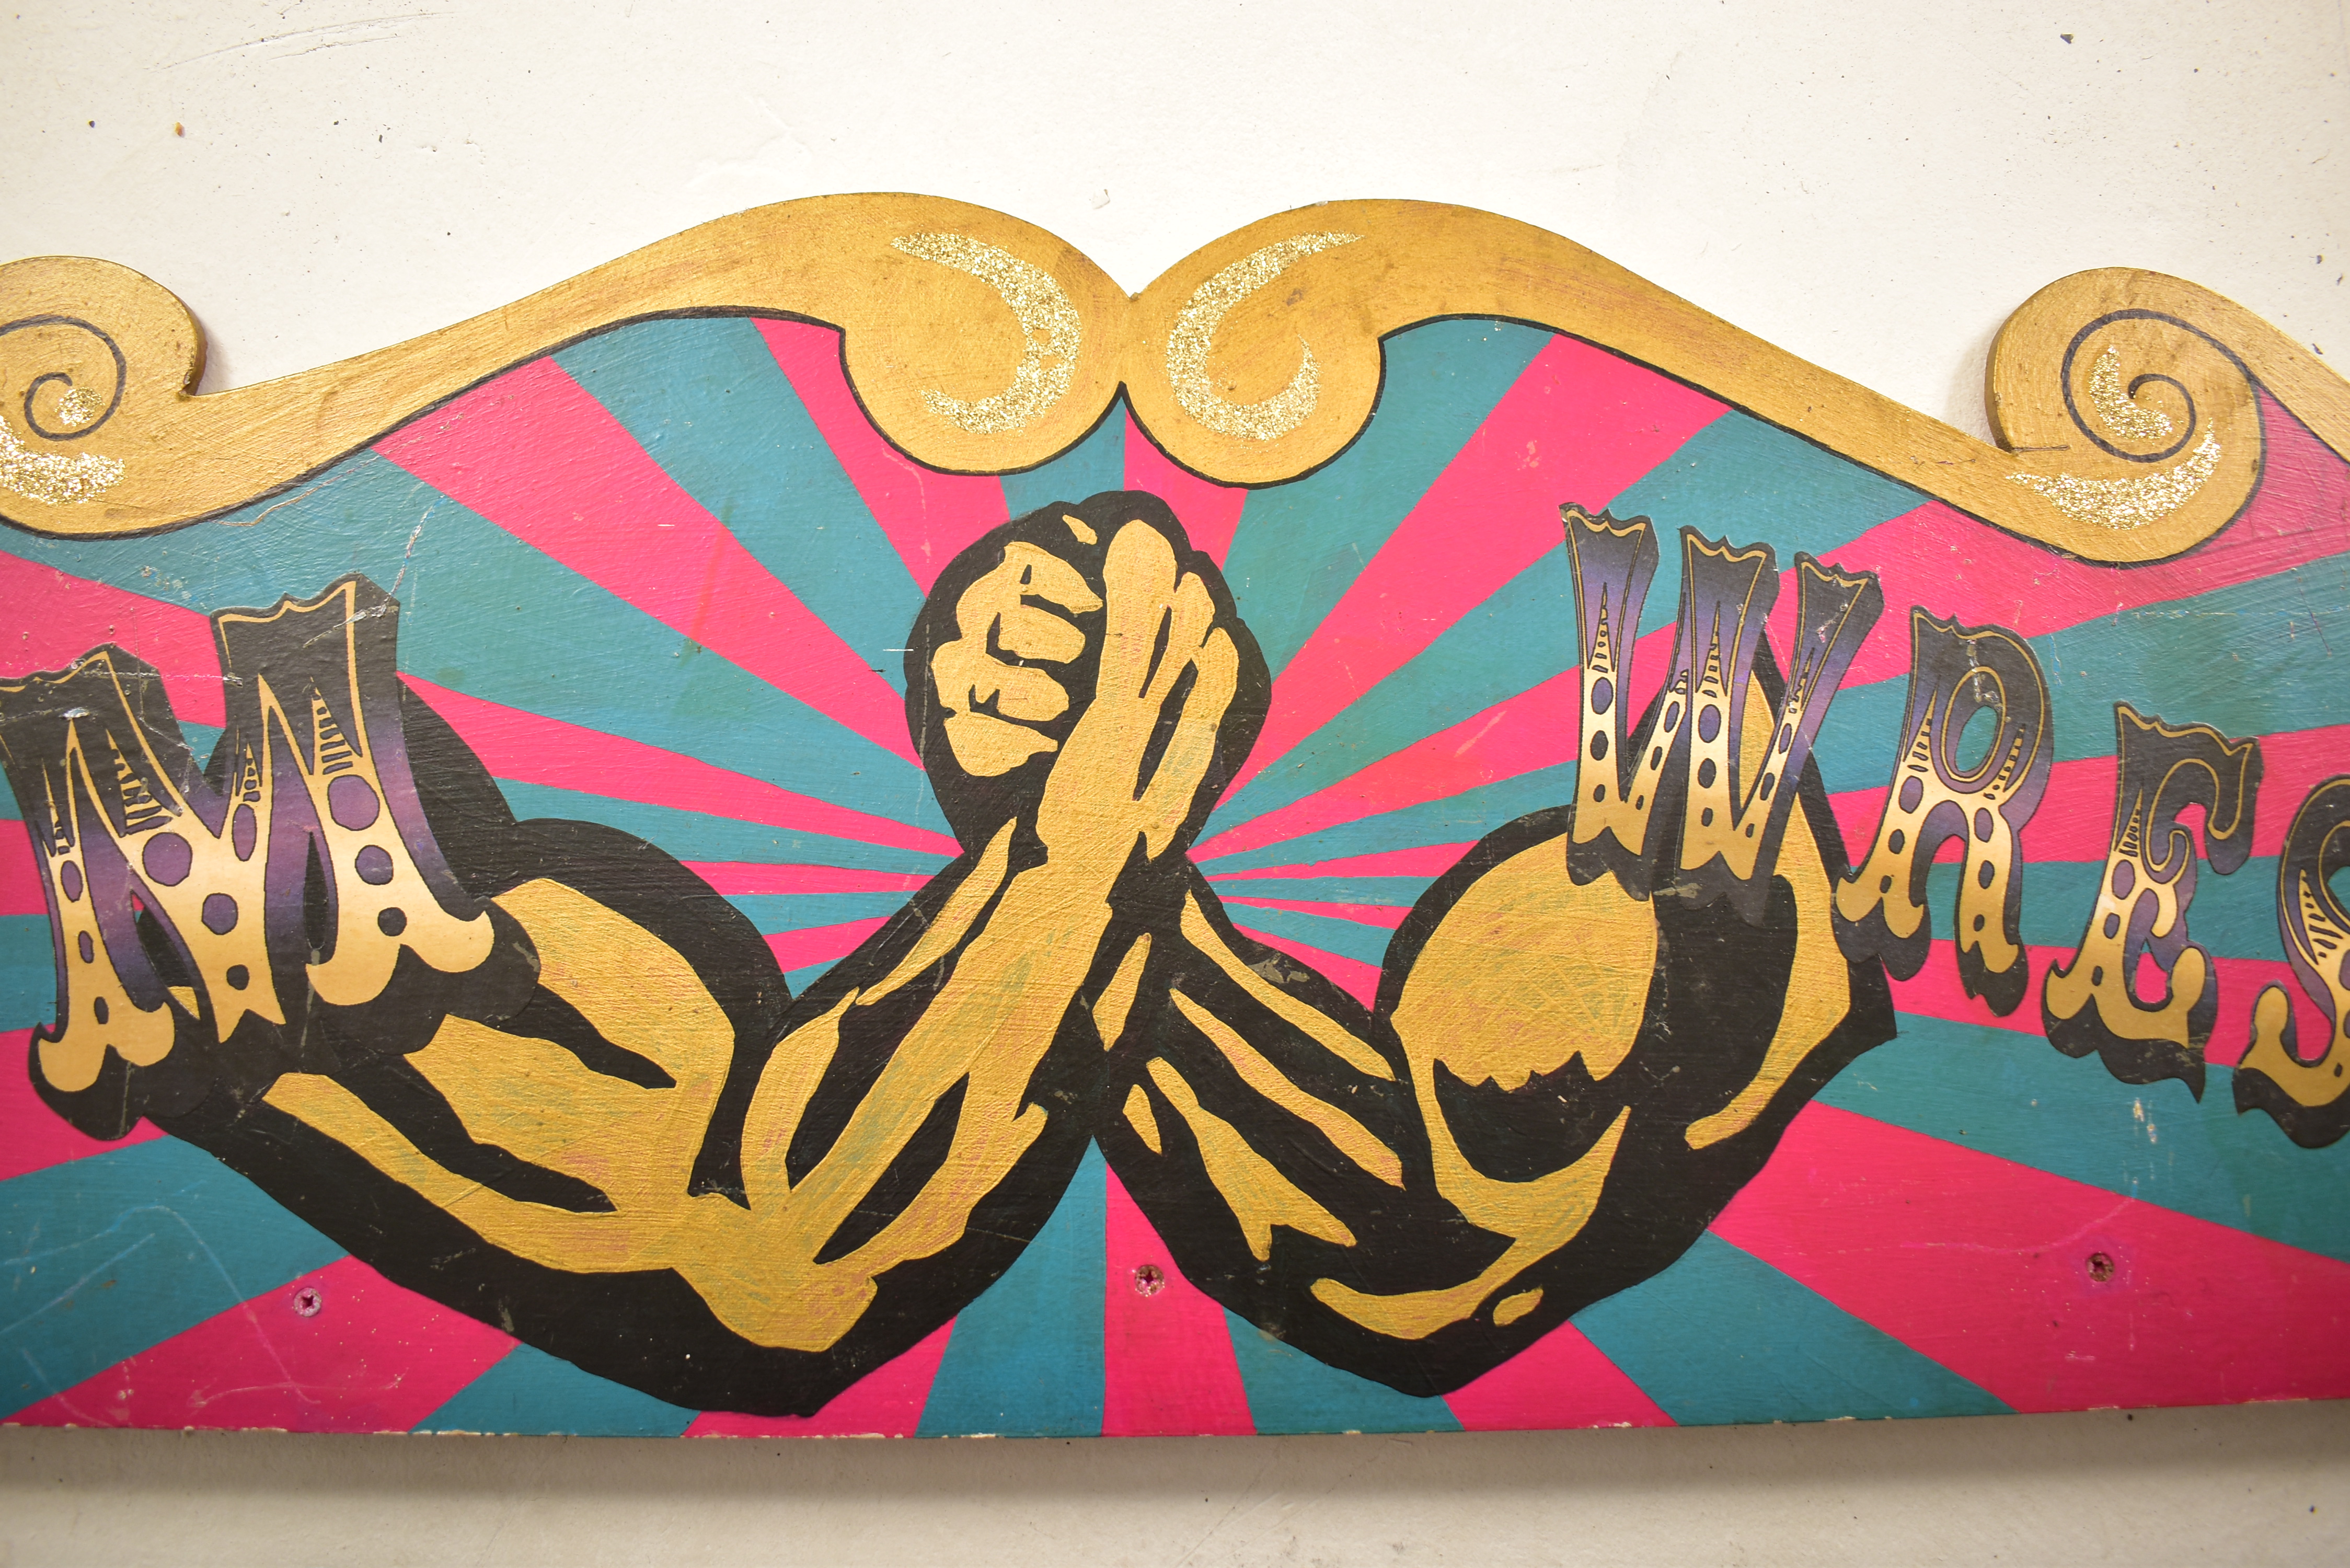 ARM WRESTLING - 20TH CENTURY FAIRGROUND PAINTED SIGN - Image 2 of 3